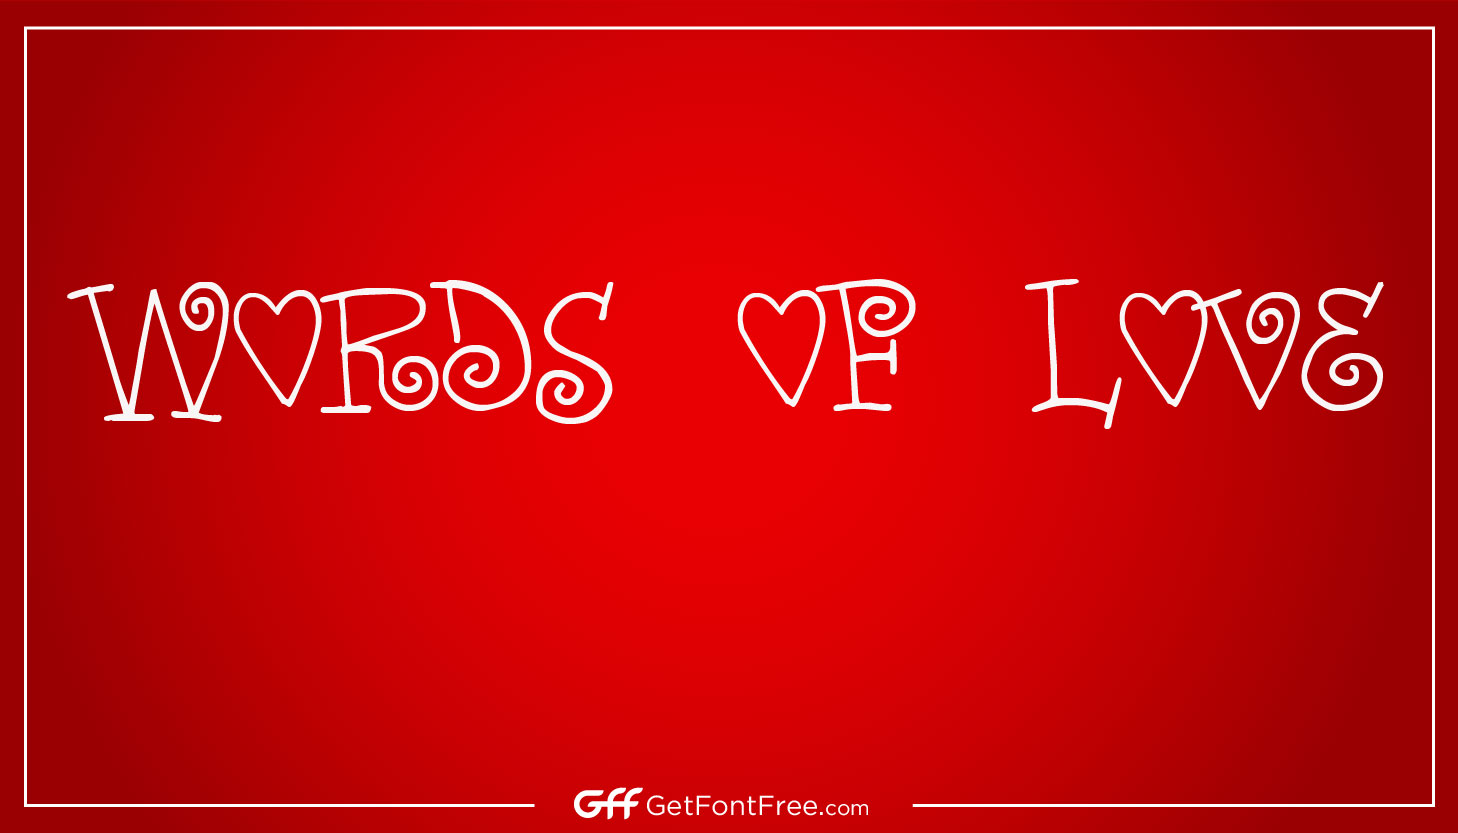 Words of Love Font is a unique and elegant font that is often associated with romance and love. It was designed by a graphic designer named Vladimir Nikolic, who is known for creating a wide range of font styles that are popular in the design industry.